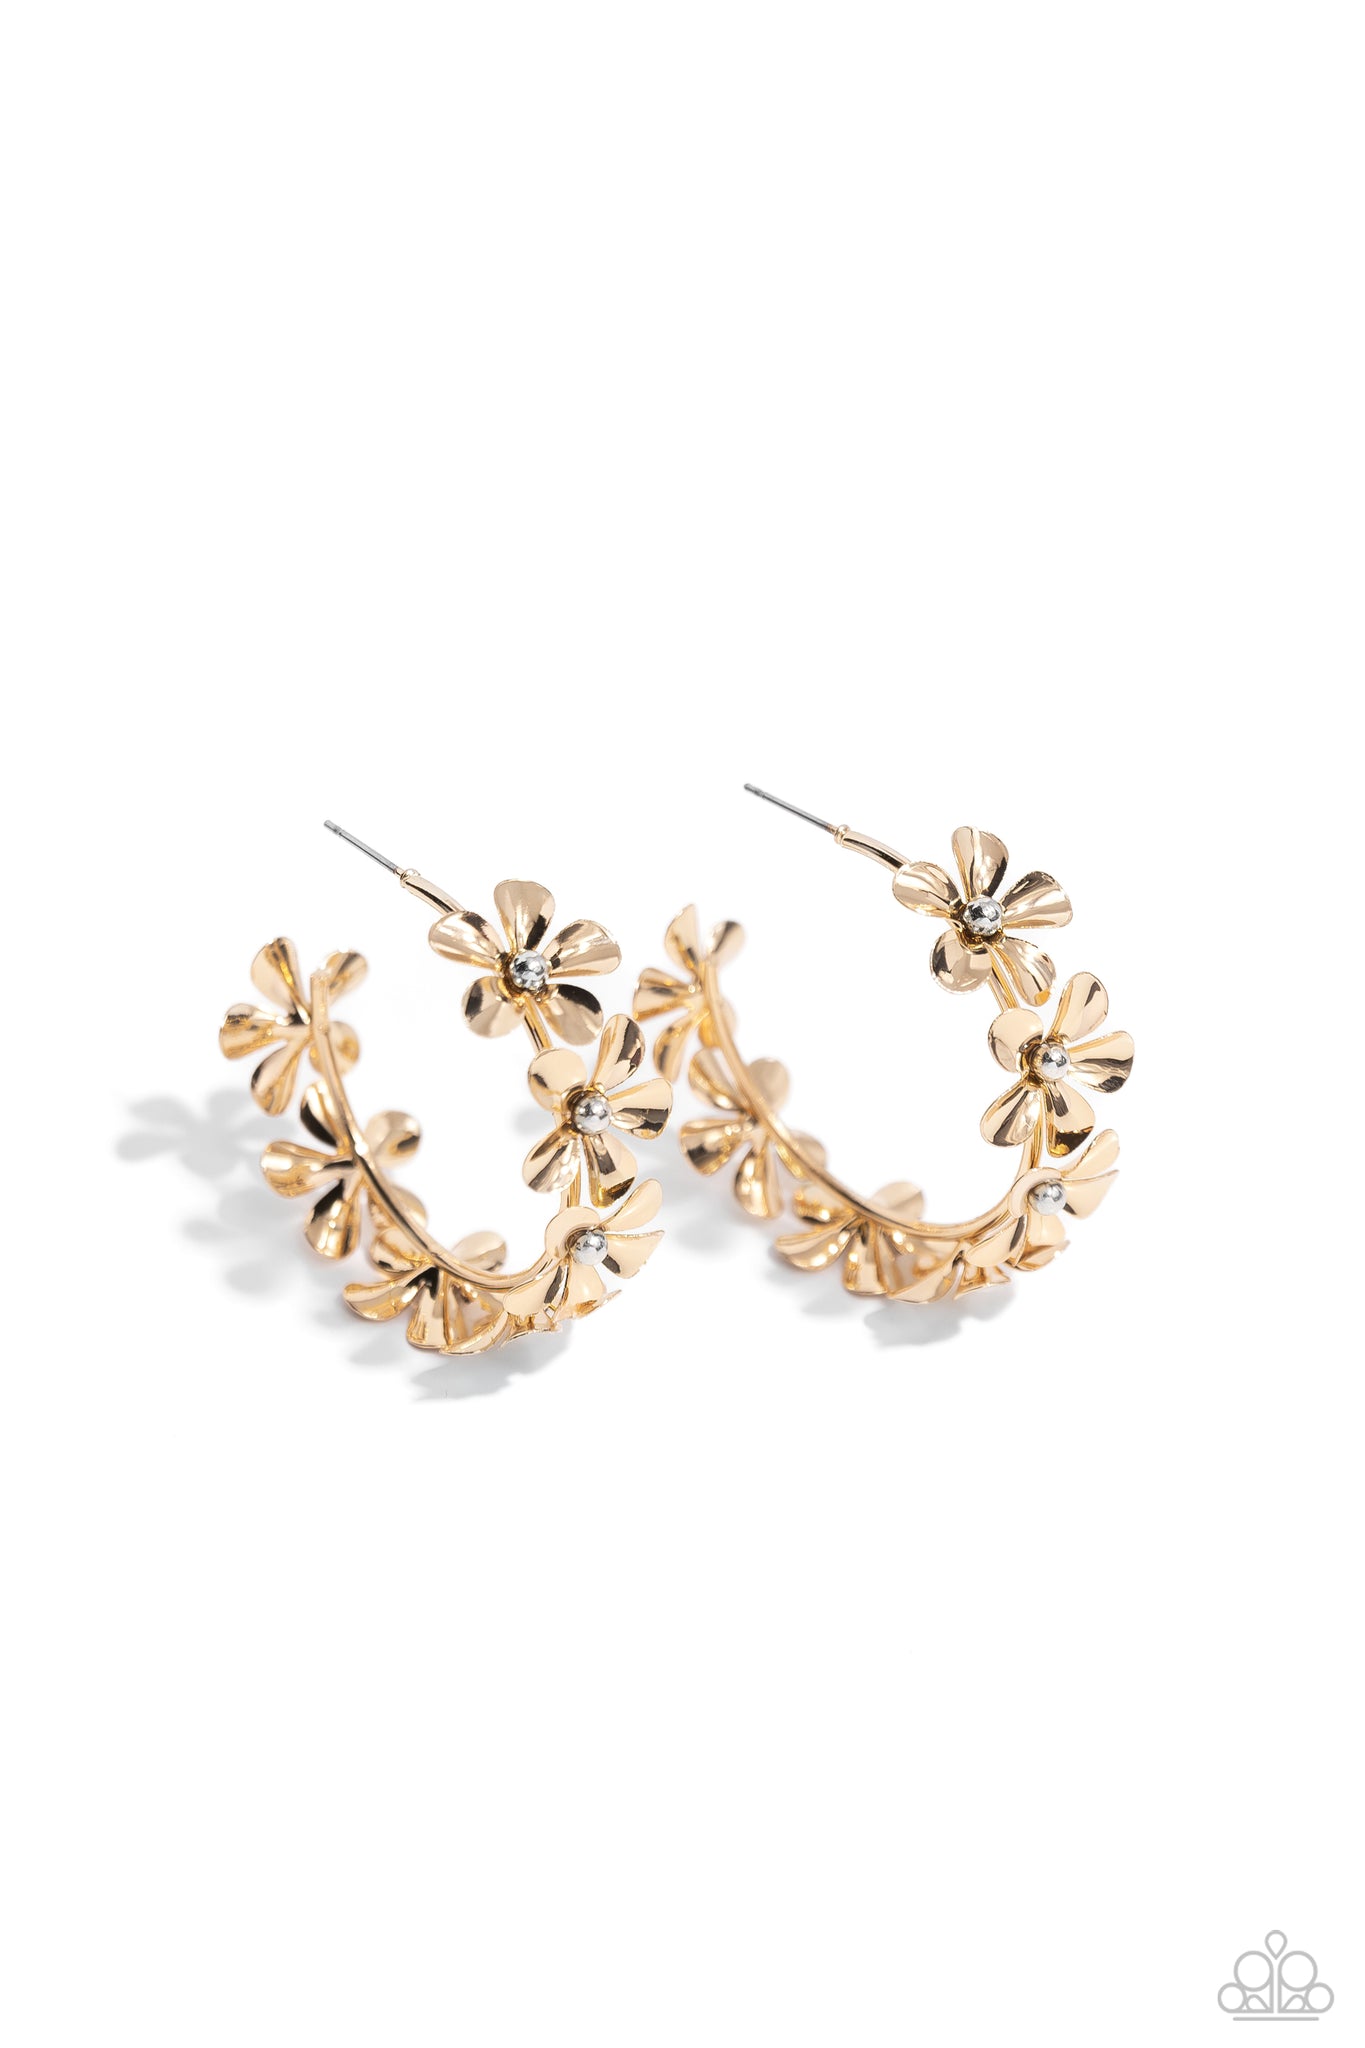 Floral Flamenco Earring (Silver, Gold)